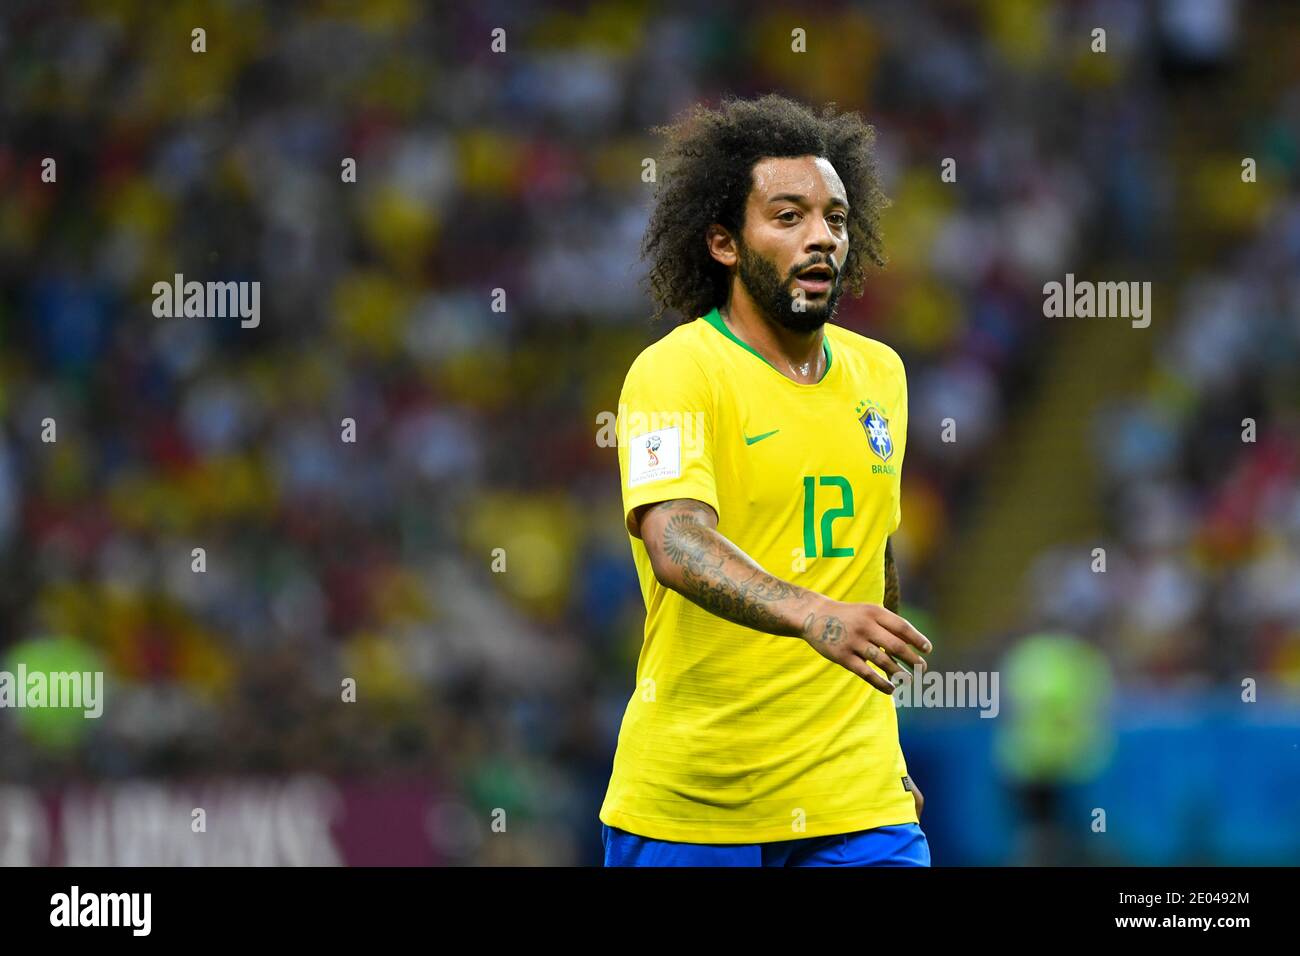 KAZAN, RUSSIA 6 July 2018 Marcelo of Brazil during the 2018 FIFA World Cup Russia Quarter Final match between Brazil and Belgium Stock Photo